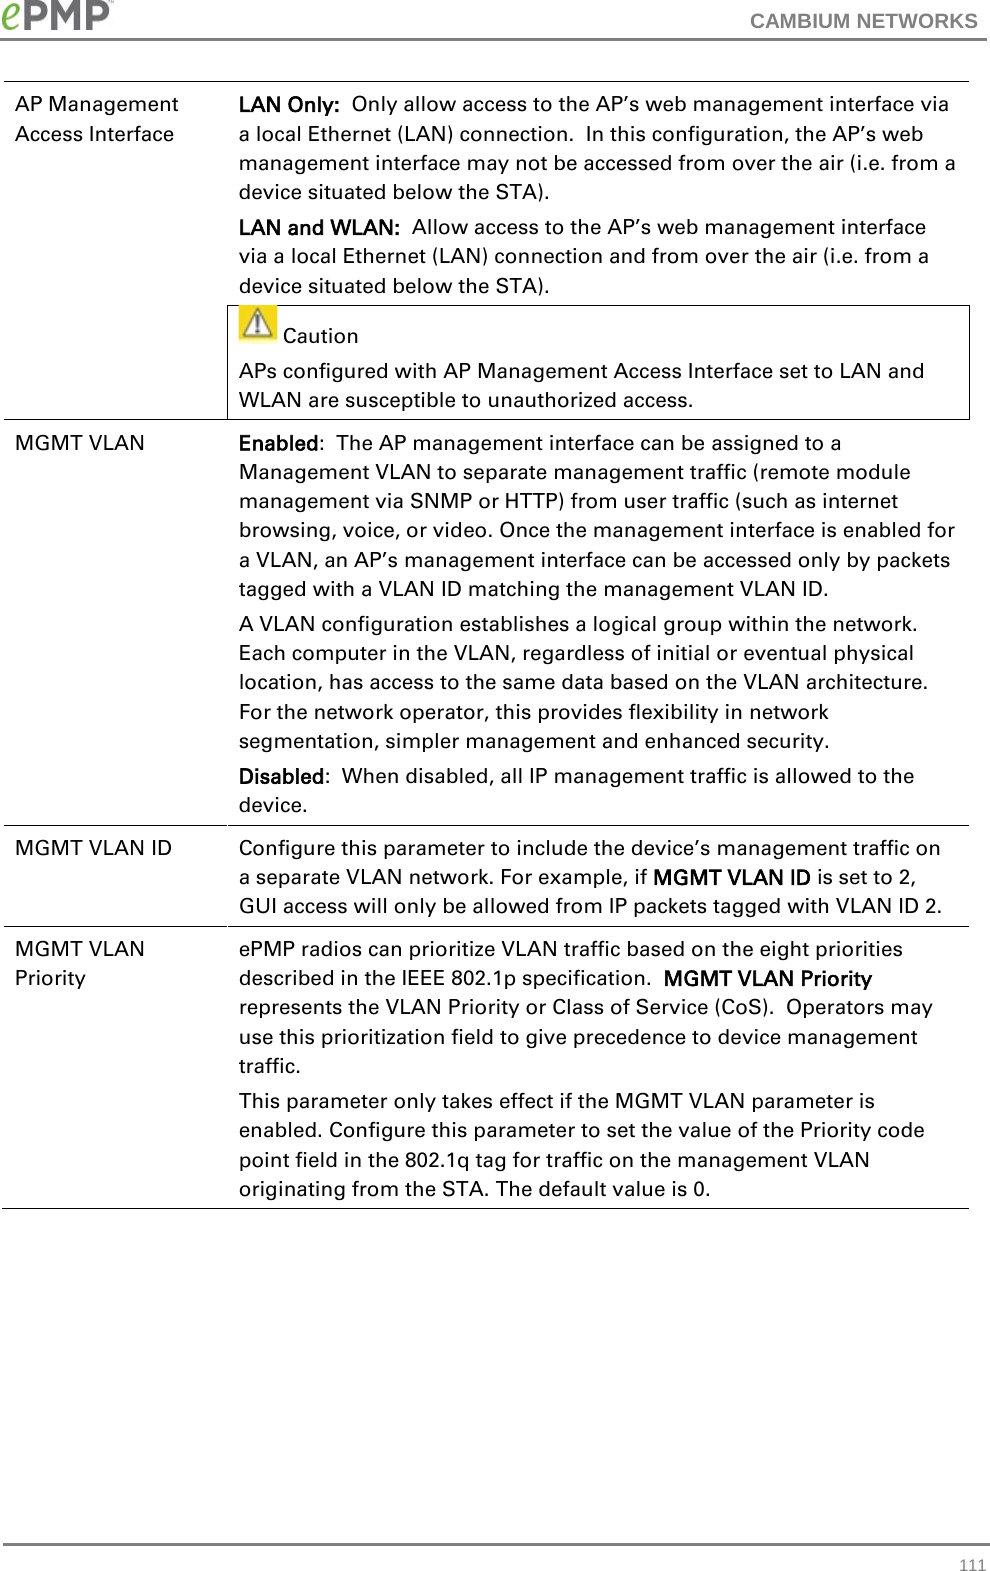 CAMBIUM NETWORKS  AP Management Access Interface LAN Only:  Only allow access to the AP’s web management interface via a local Ethernet (LAN) connection.  In this configuration, the AP’s web management interface may not be accessed from over the air (i.e. from a device situated below the STA). LAN and WLAN:  Allow access to the AP’s web management interface via a local Ethernet (LAN) connection and from over the air (i.e. from a device situated below the STA).  Caution APs configured with AP Management Access Interface set to LAN and WLAN are susceptible to unauthorized access. MGMT VLAN Enabled:  The AP management interface can be assigned to a Management VLAN to separate management traffic (remote module management via SNMP or HTTP) from user traffic (such as internet browsing, voice, or video. Once the management interface is enabled for a VLAN, an AP’s management interface can be accessed only by packets tagged with a VLAN ID matching the management VLAN ID.   A VLAN configuration establishes a logical group within the network.  Each computer in the VLAN, regardless of initial or eventual physical location, has access to the same data based on the VLAN architecture.  For the network operator, this provides flexibility in network segmentation, simpler management and enhanced security. Disabled:  When disabled, all IP management traffic is allowed to the device. MGMT VLAN ID Configure this parameter to include the device’s management traffic on a separate VLAN network. For example, if MGMT VLAN ID is set to 2, GUI access will only be allowed from IP packets tagged with VLAN ID 2. MGMT VLAN Priority ePMP radios can prioritize VLAN traffic based on the eight priorities described in the IEEE 802.1p specification.  MGMT VLAN Priority represents the VLAN Priority or Class of Service (CoS).  Operators may use this prioritization field to give precedence to device management traffic. This parameter only takes effect if the MGMT VLAN parameter is enabled. Configure this parameter to set the value of the Priority code point field in the 802.1q tag for traffic on the management VLAN originating from the STA. The default value is 0.  111 